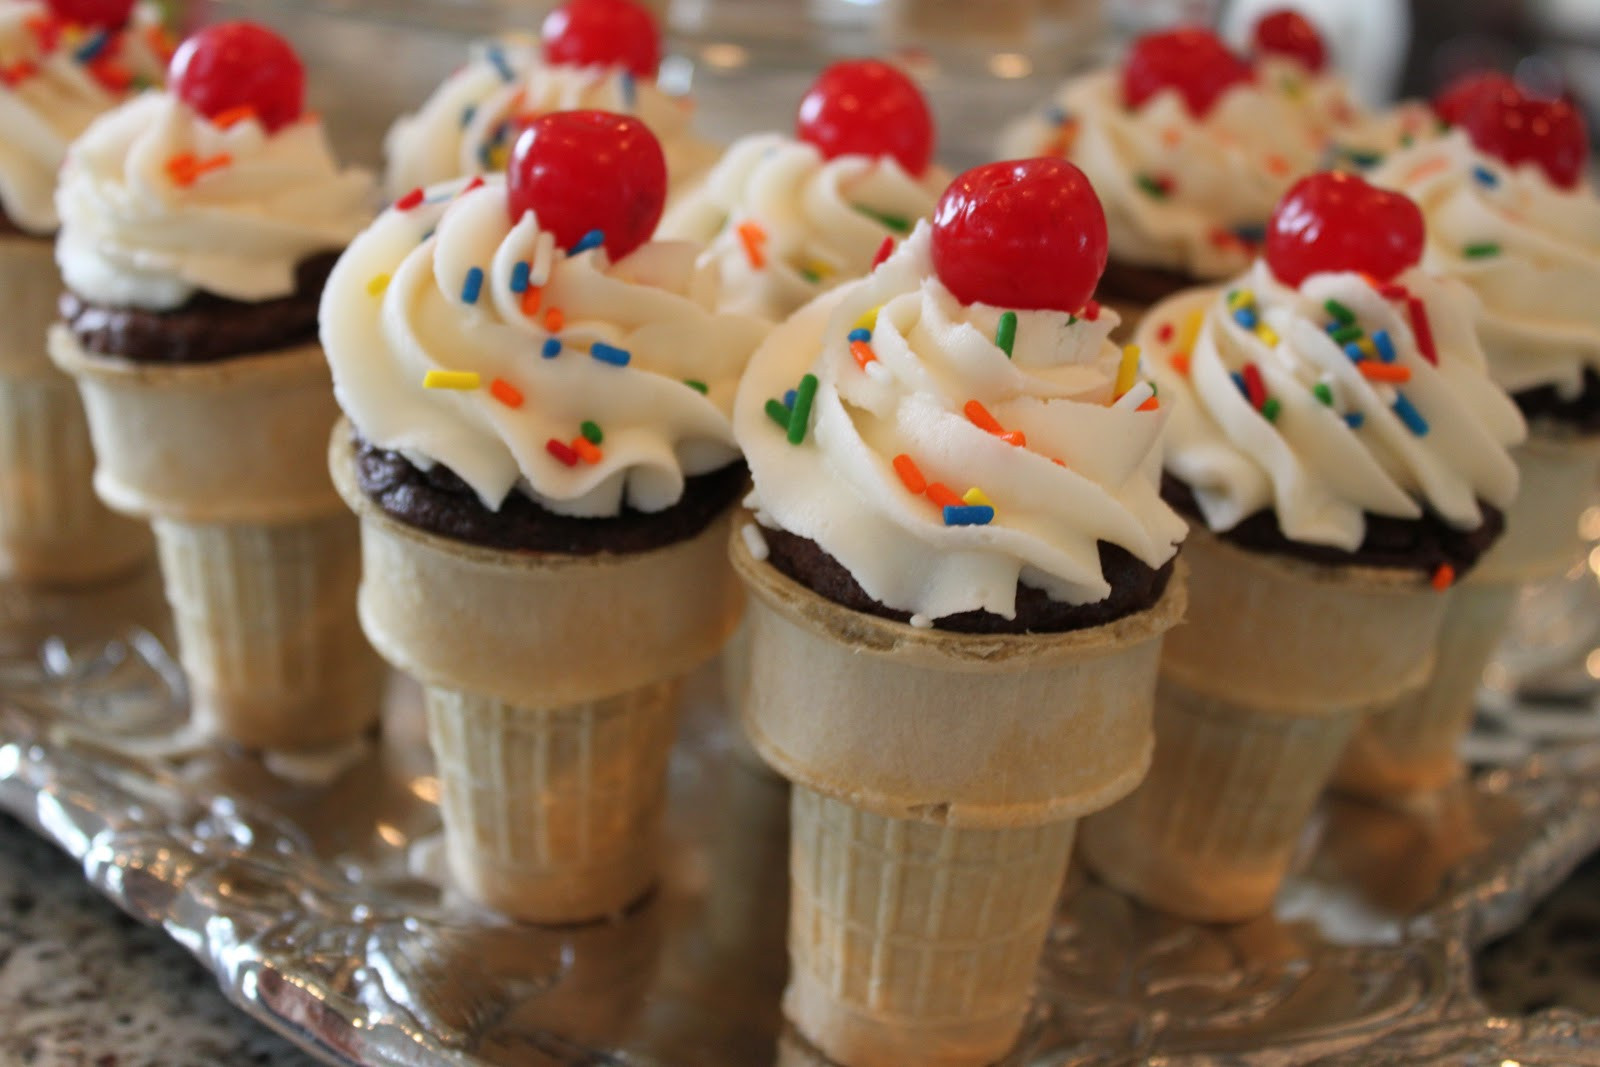 Easy Cupcake Decorating Ideas For Summer
 Just a Little Party Ice Cream Cone Cupcakes fun